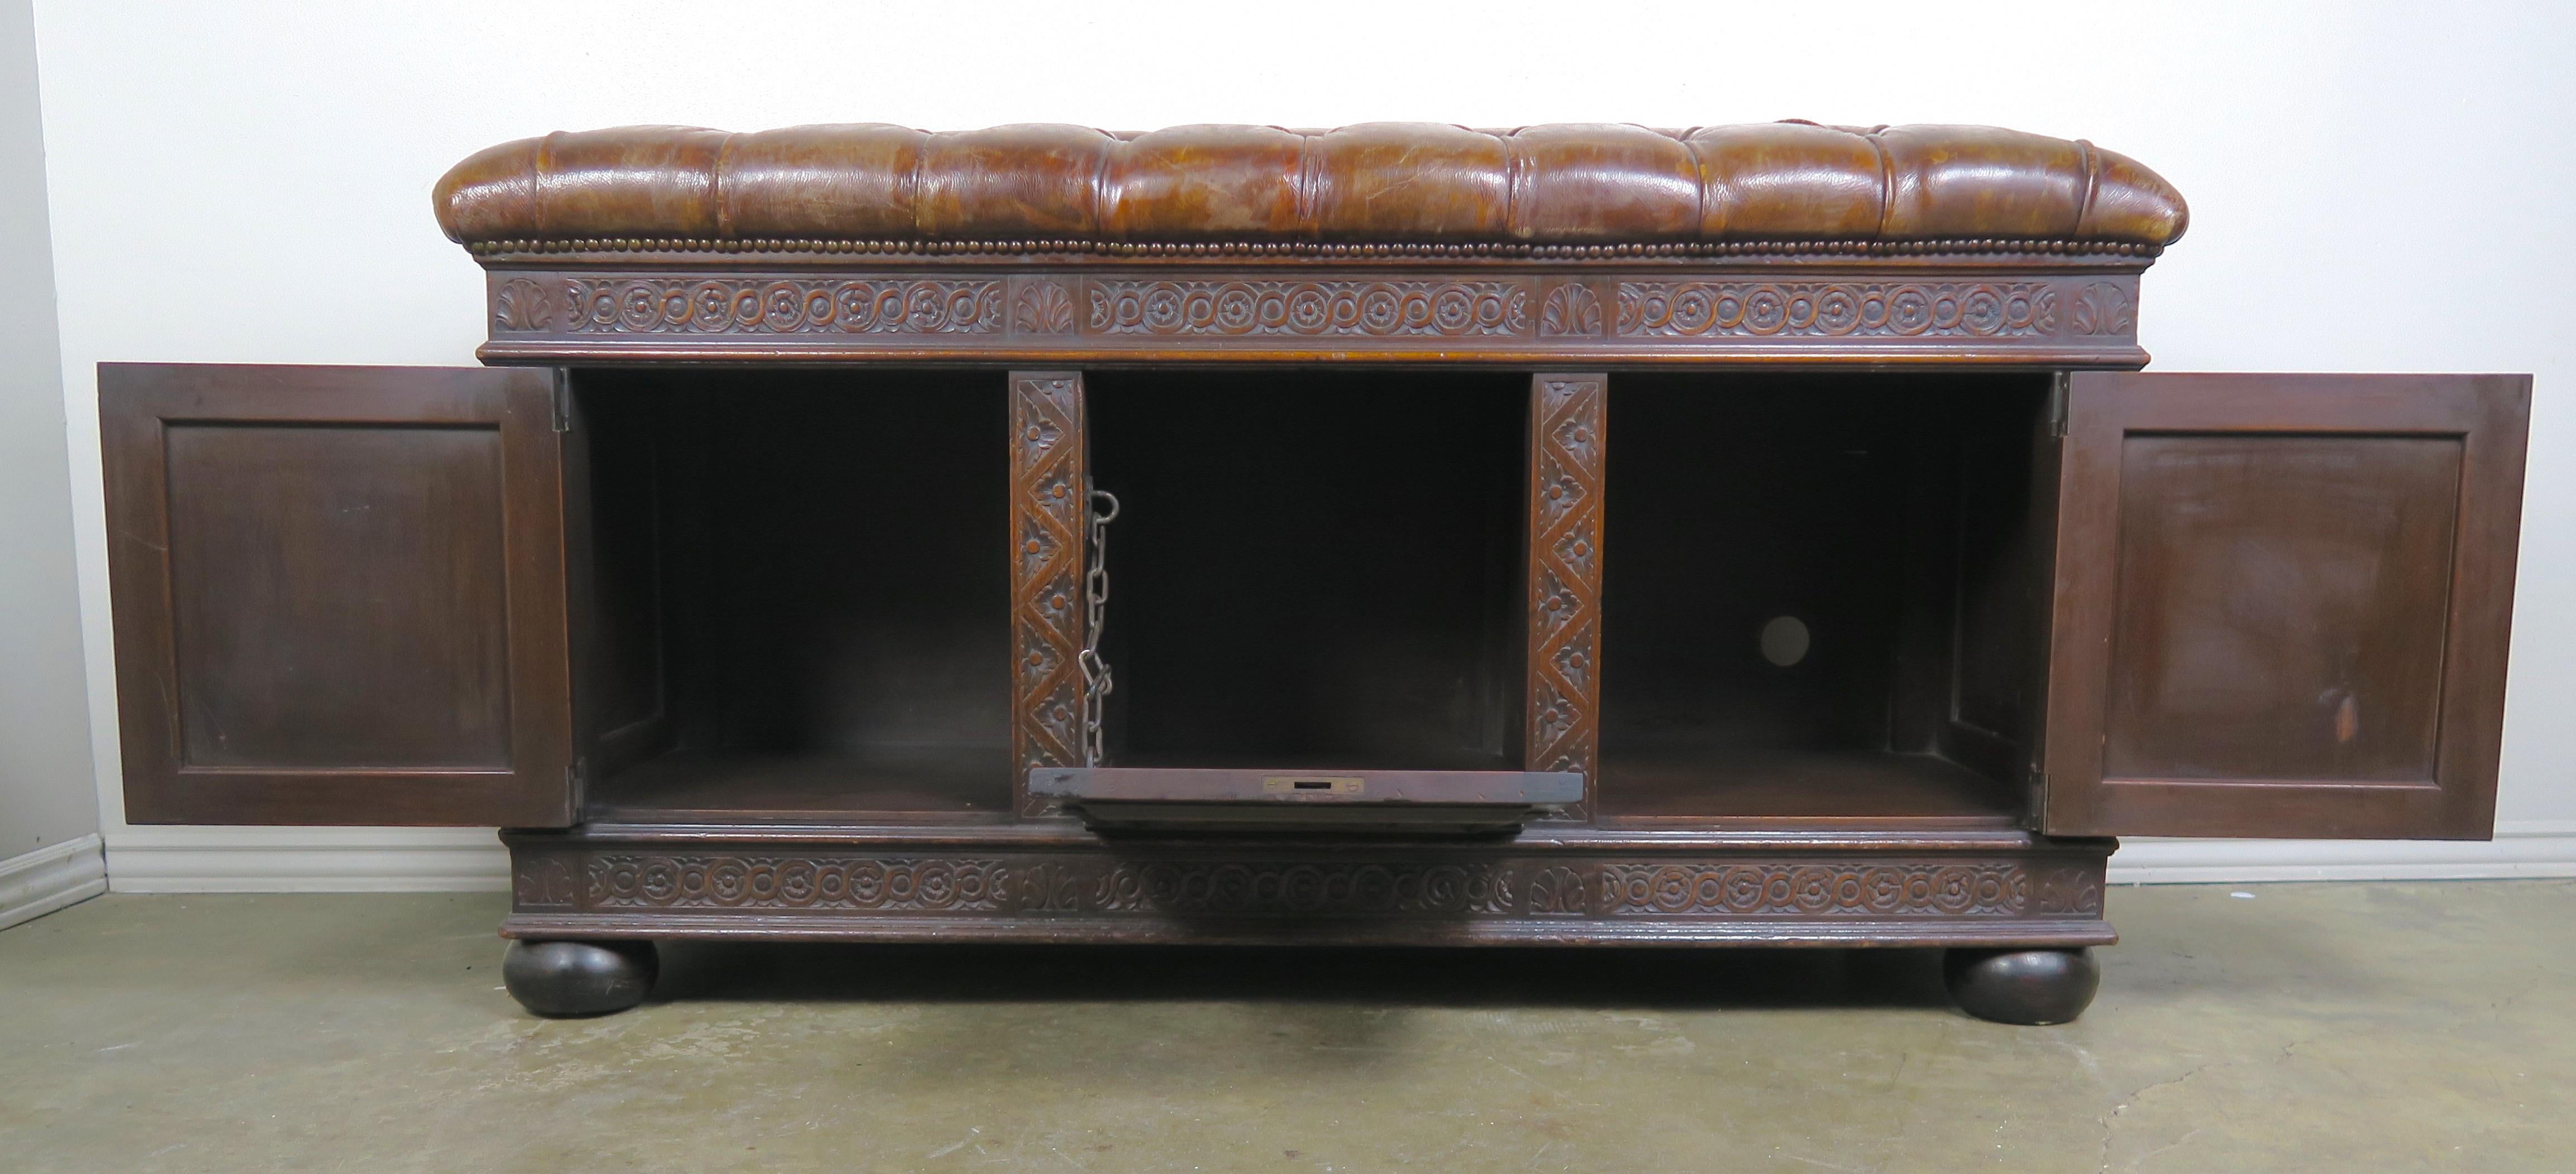 Hand-Carved English Oak Leather Tufted Bench with Storage, circa 1900s